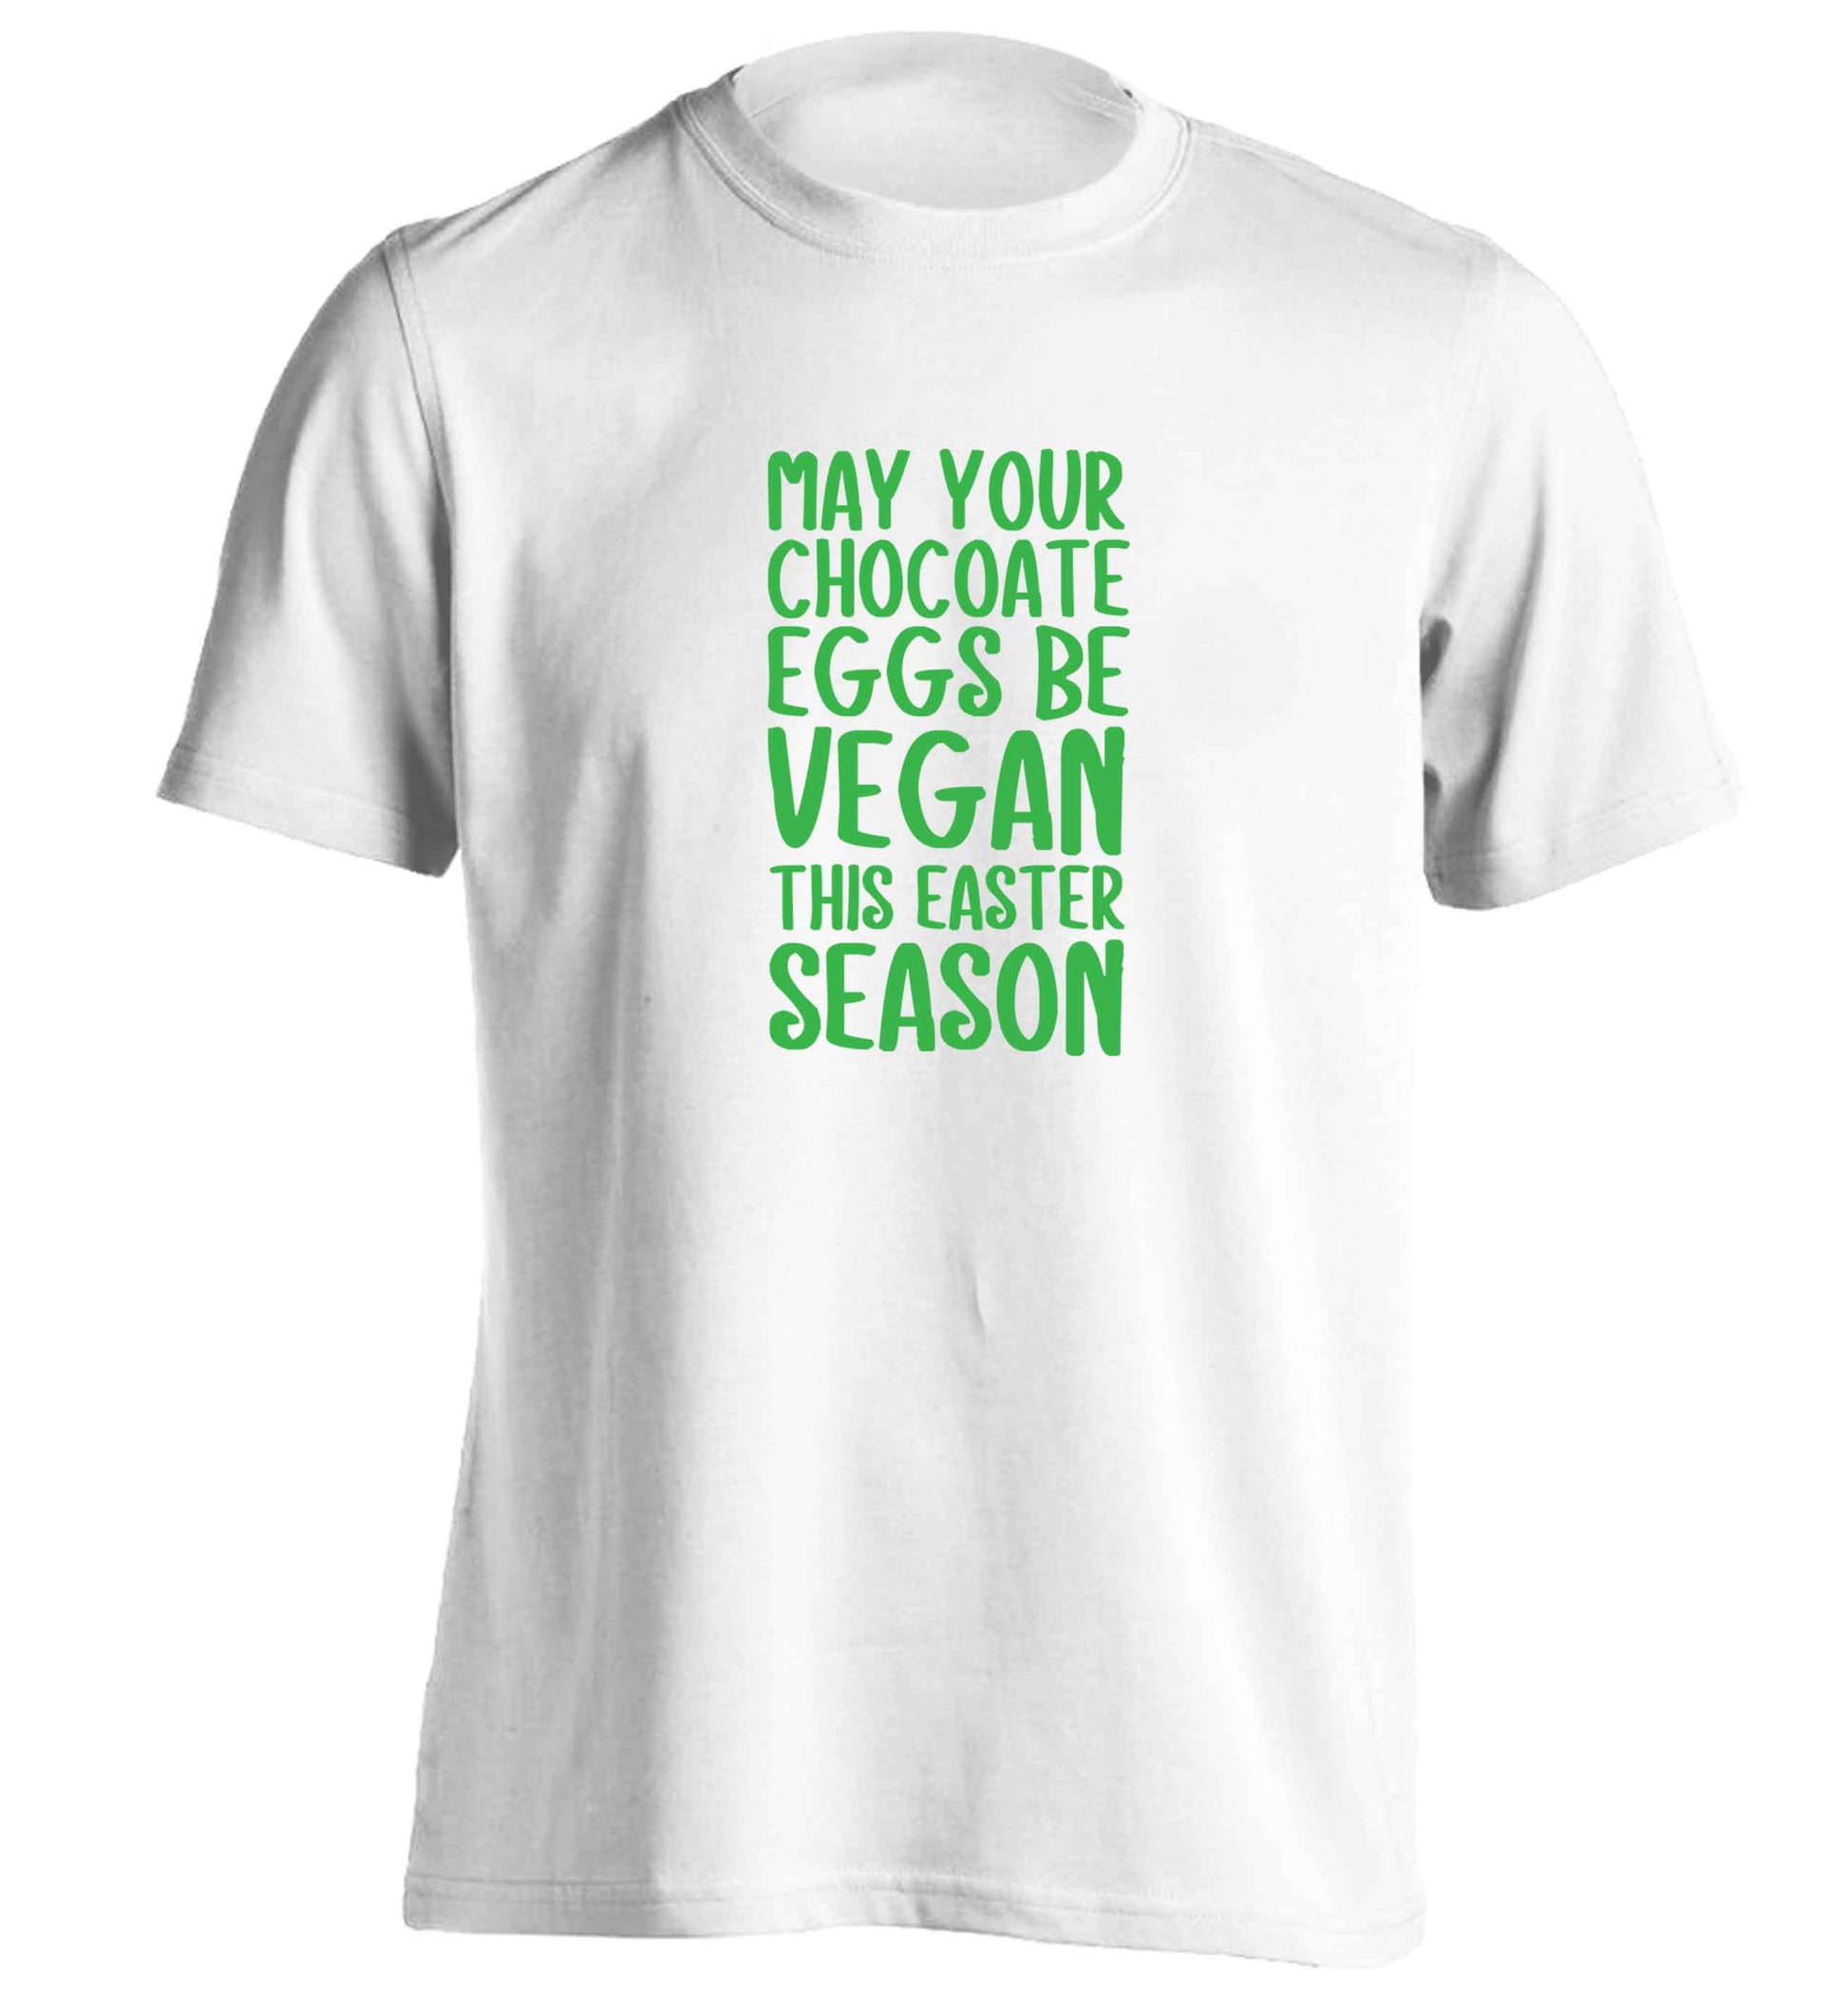 Easter bunny approved! Vegans will love this easter themed adults unisex white Tshirt 2XL